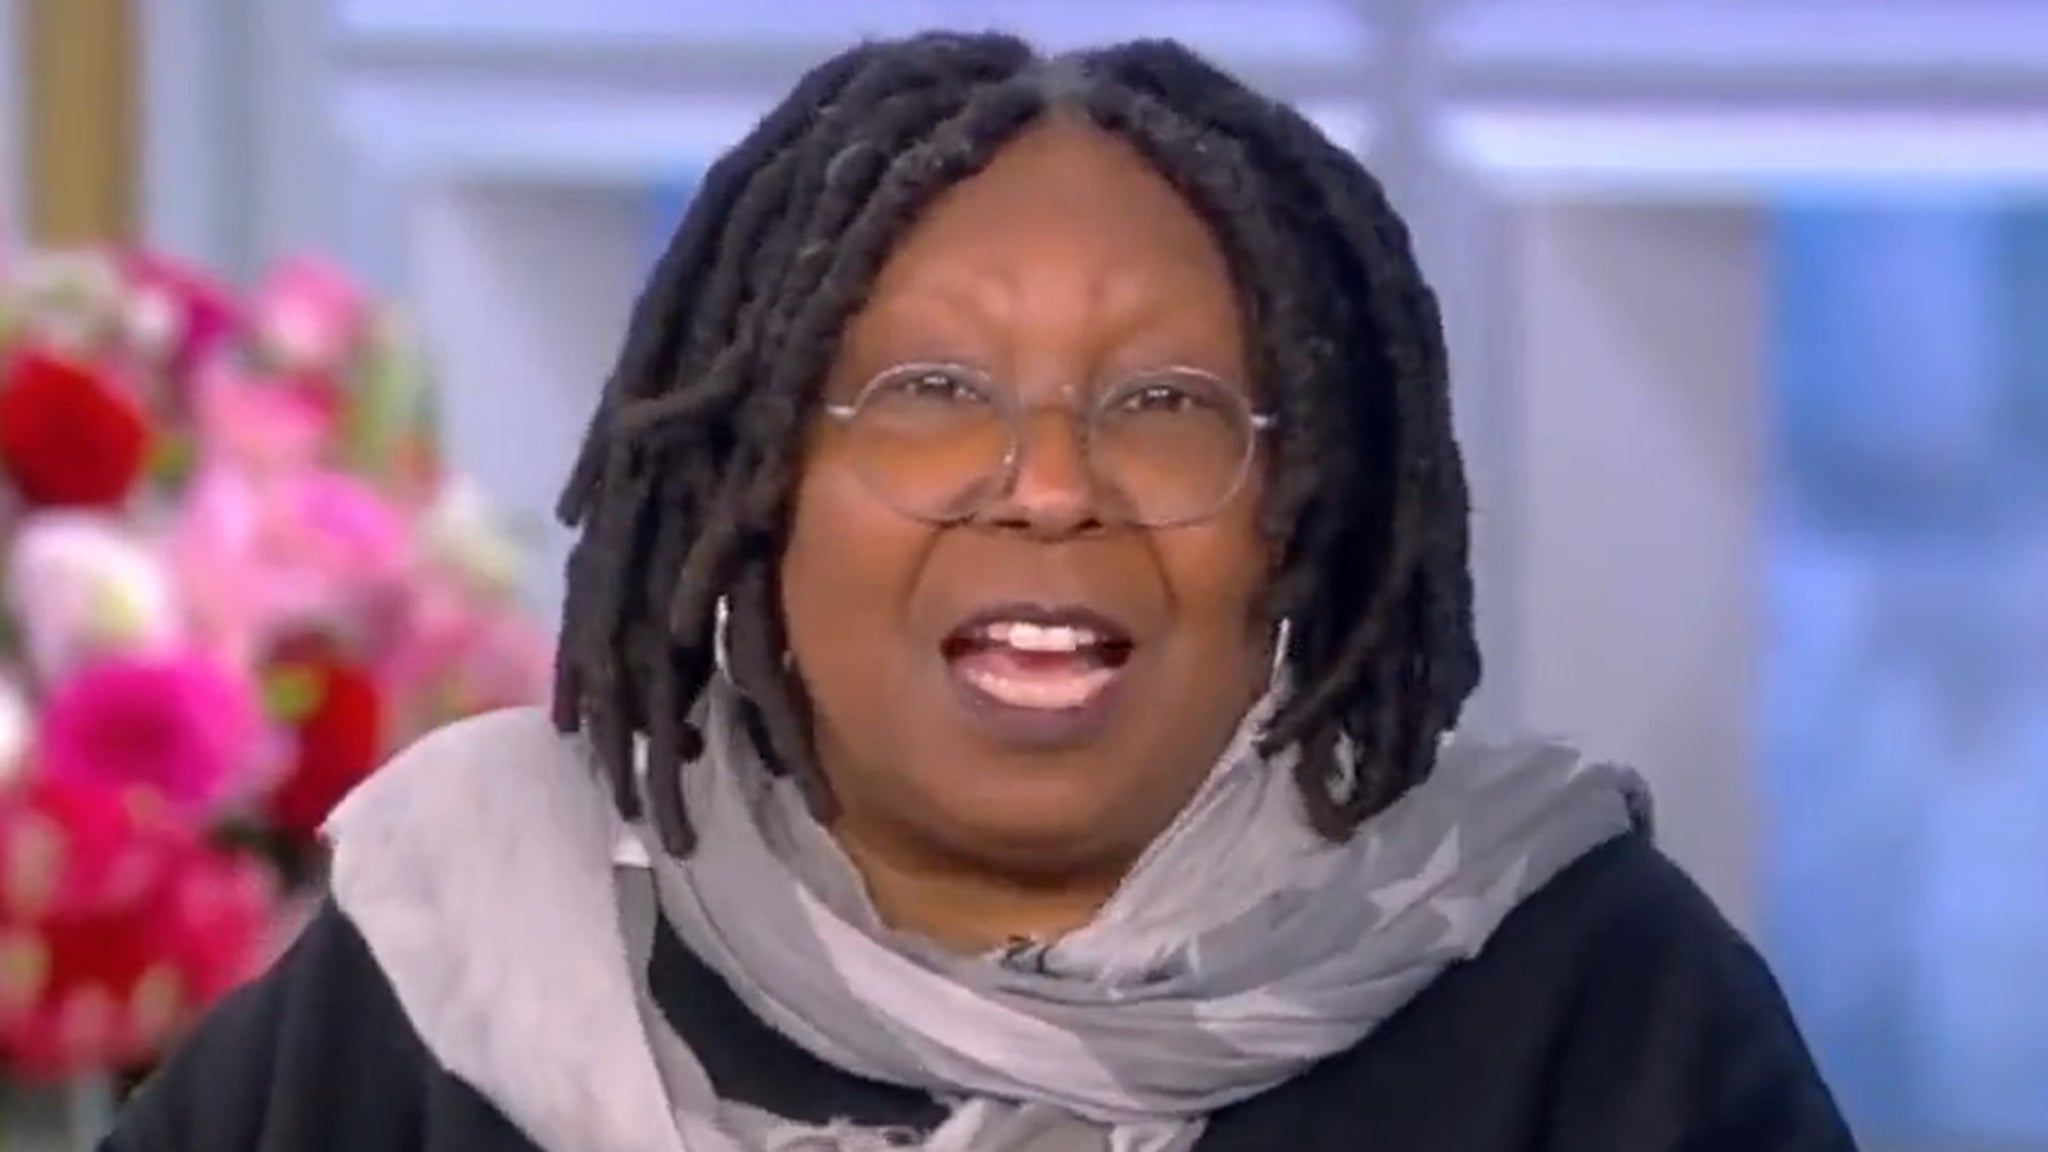 Whoopi Goldberg Returns to ‘The View’ After 2-Week Suspension – TMZ